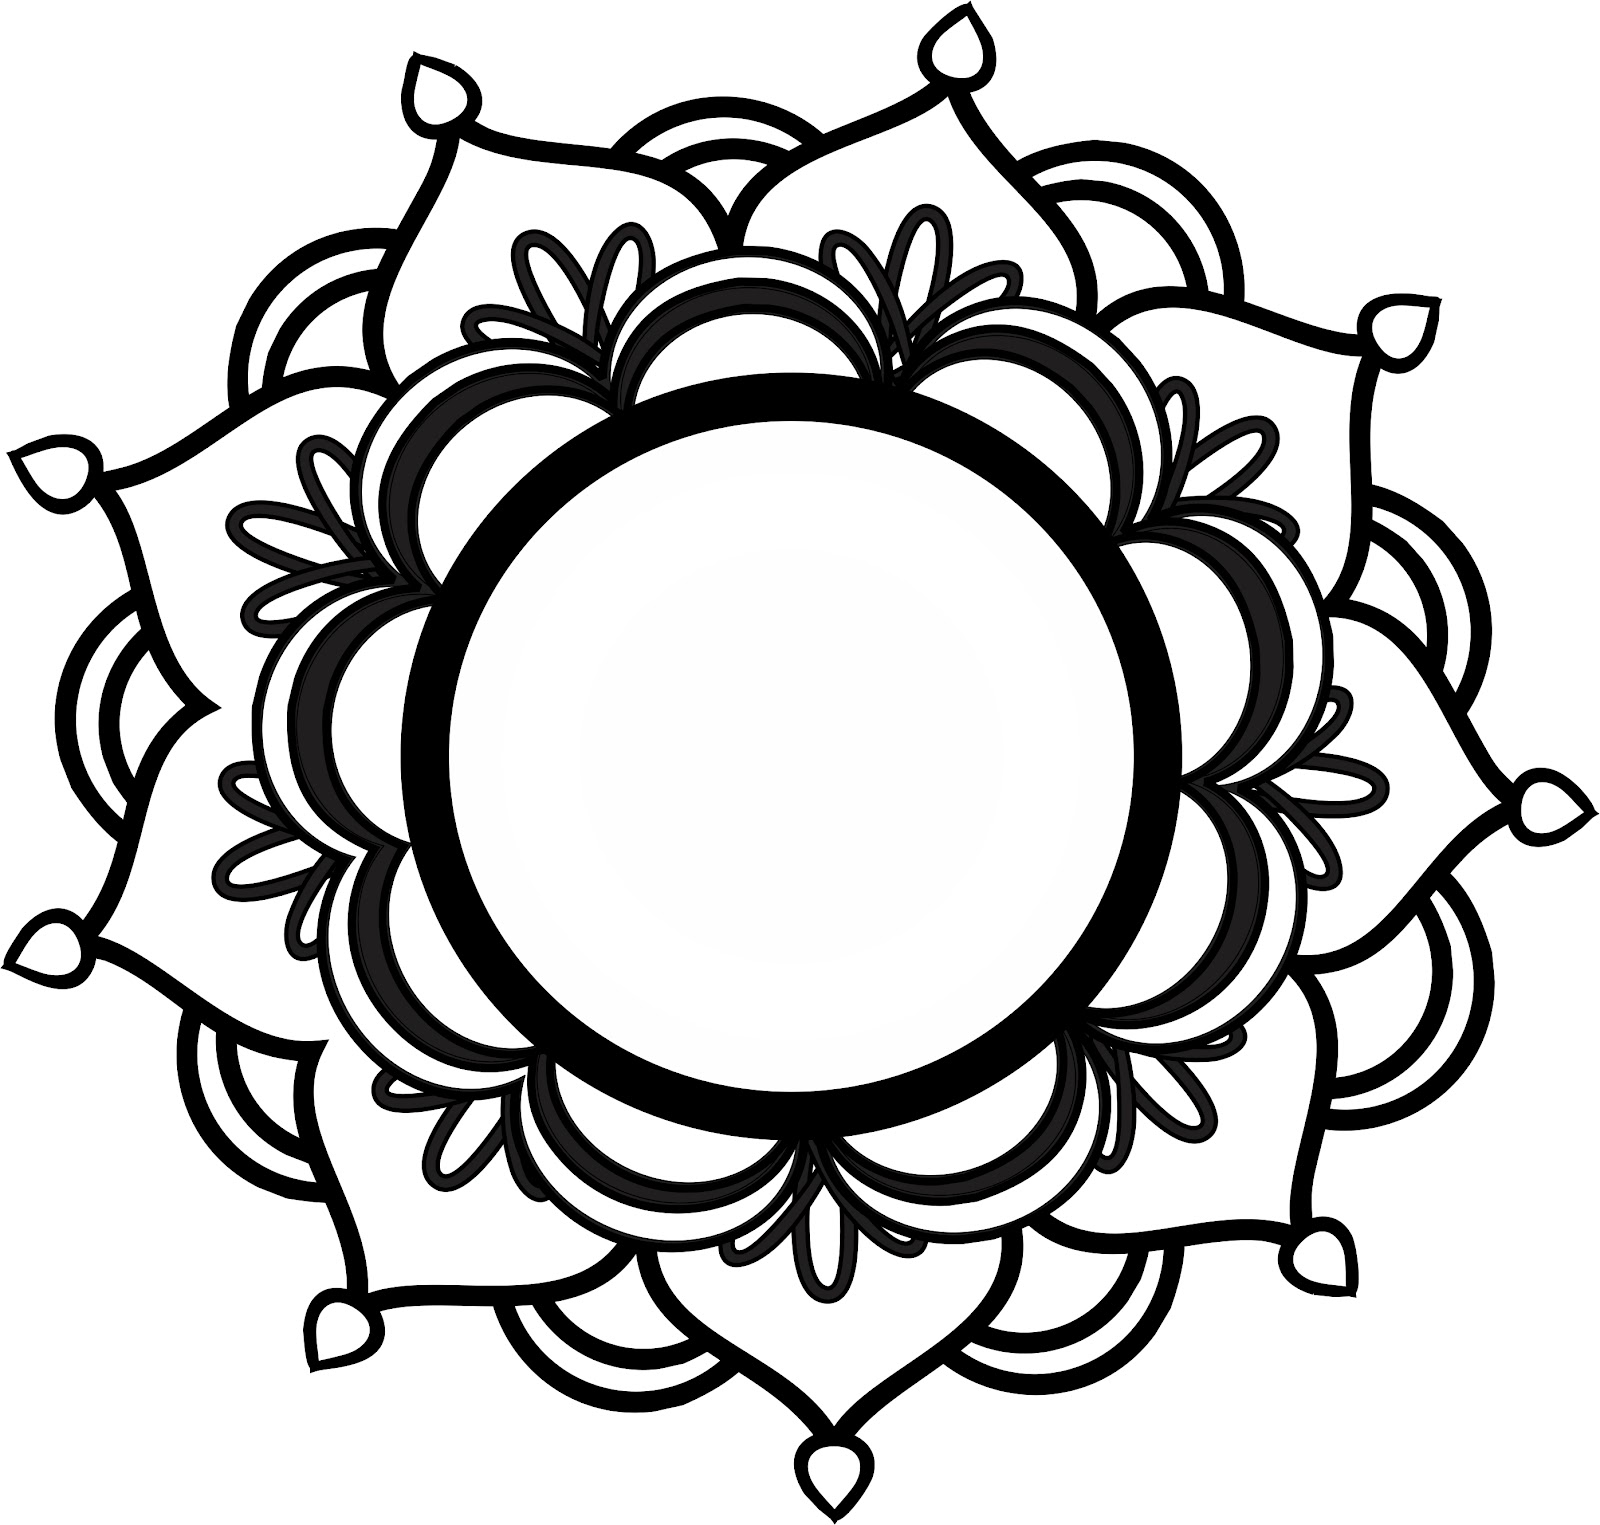 Mandala Flower Clipart | Free download on ClipArtMag